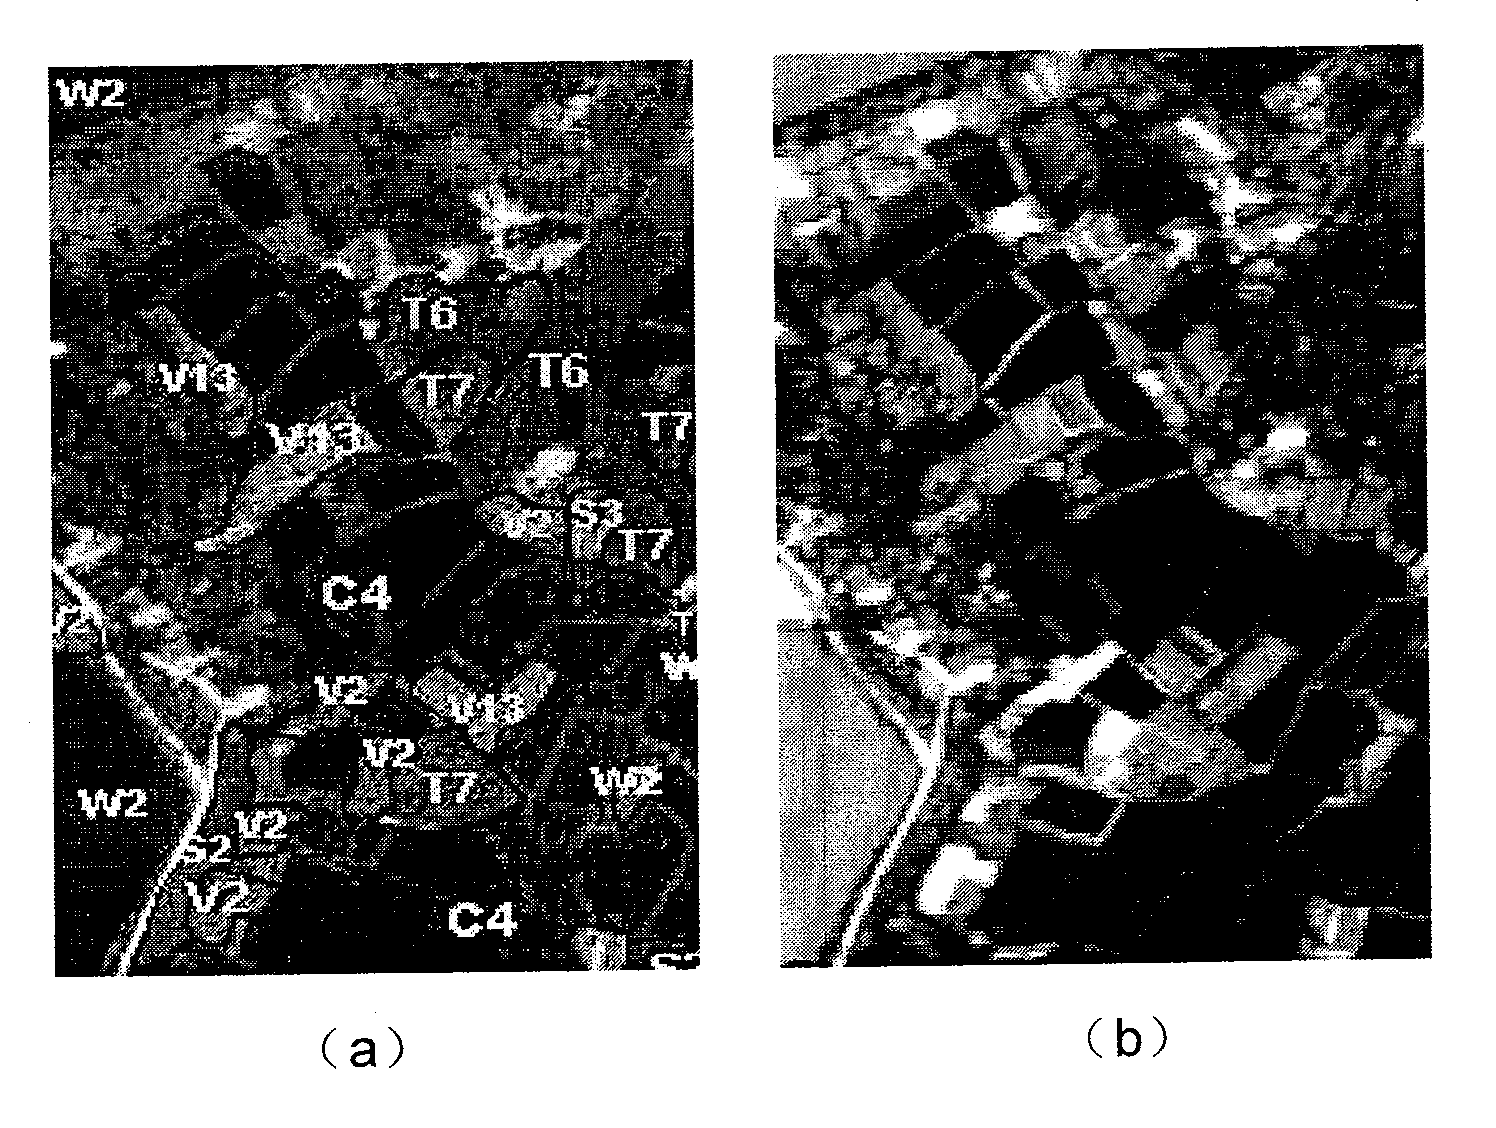 Light spectrum and spatial information bonded high spectroscopic data classification method